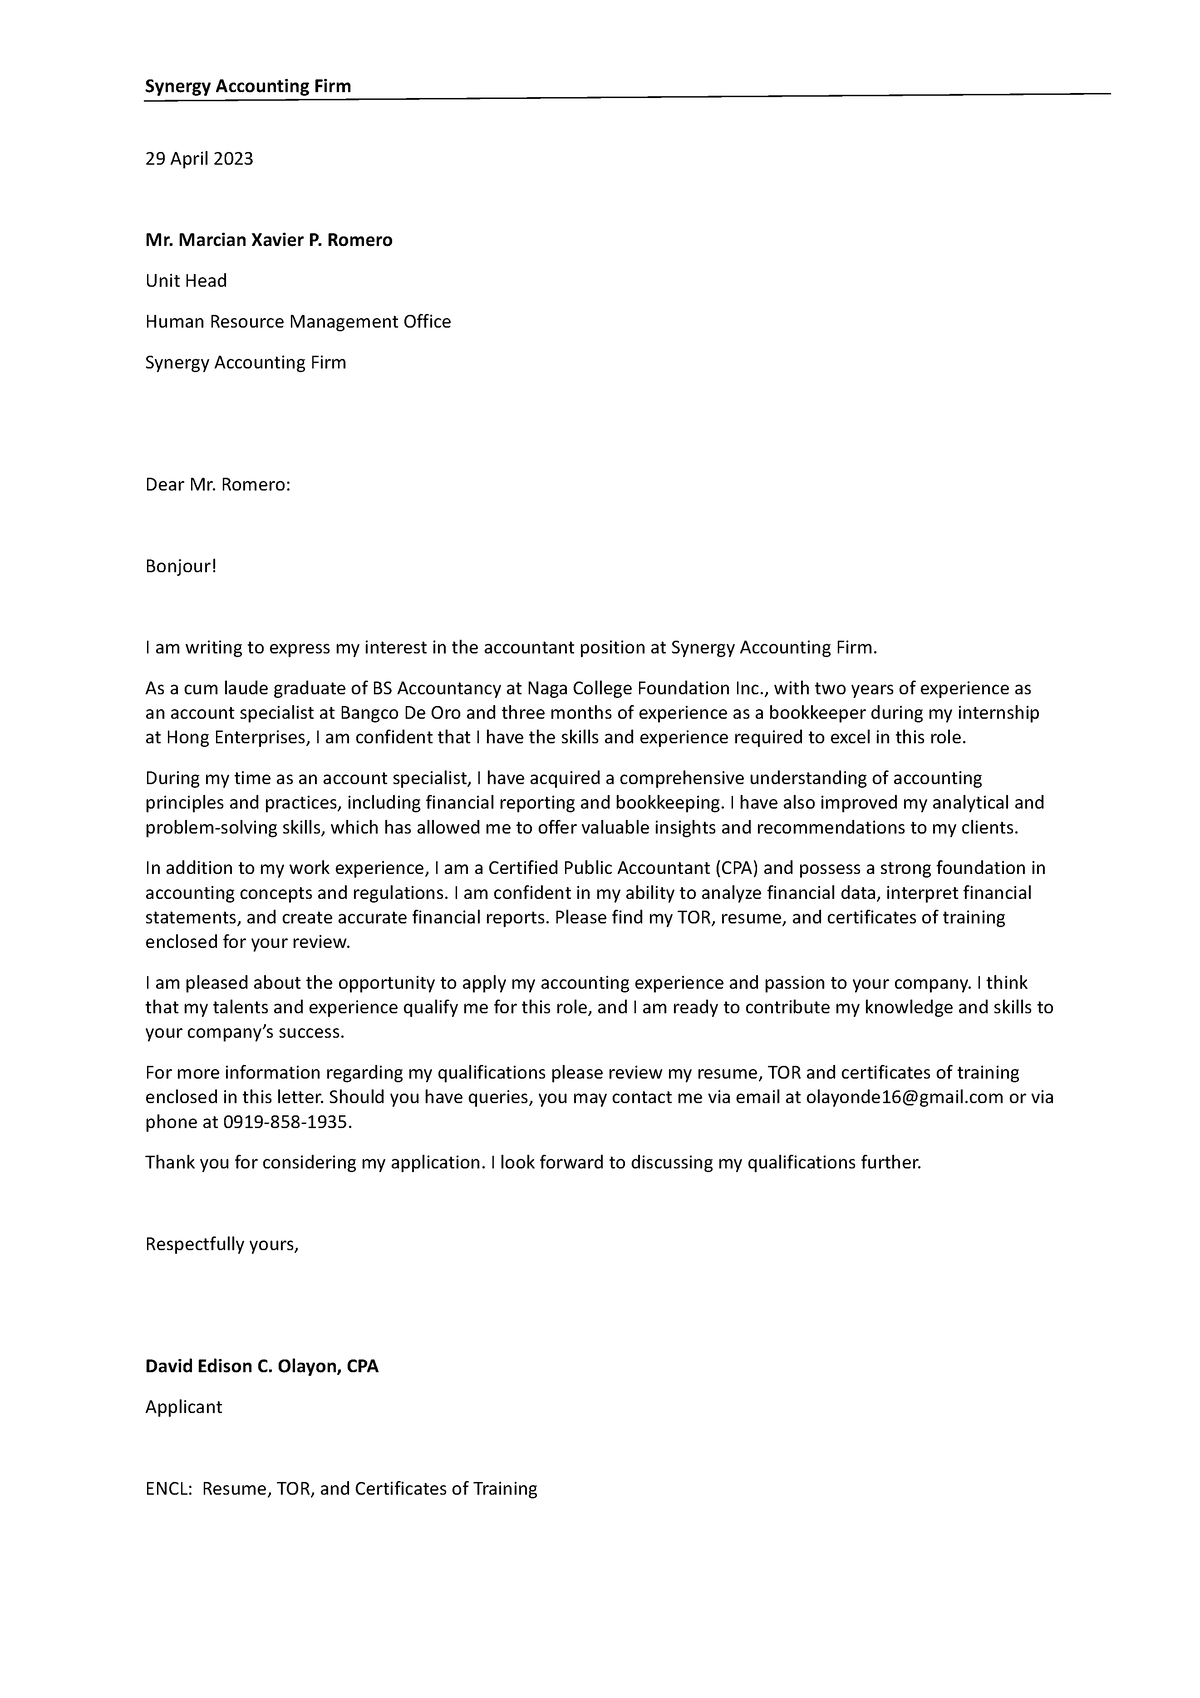 Cover Letter in oral com - Synergy Accounting Firm 29 April 2023 Mr ...